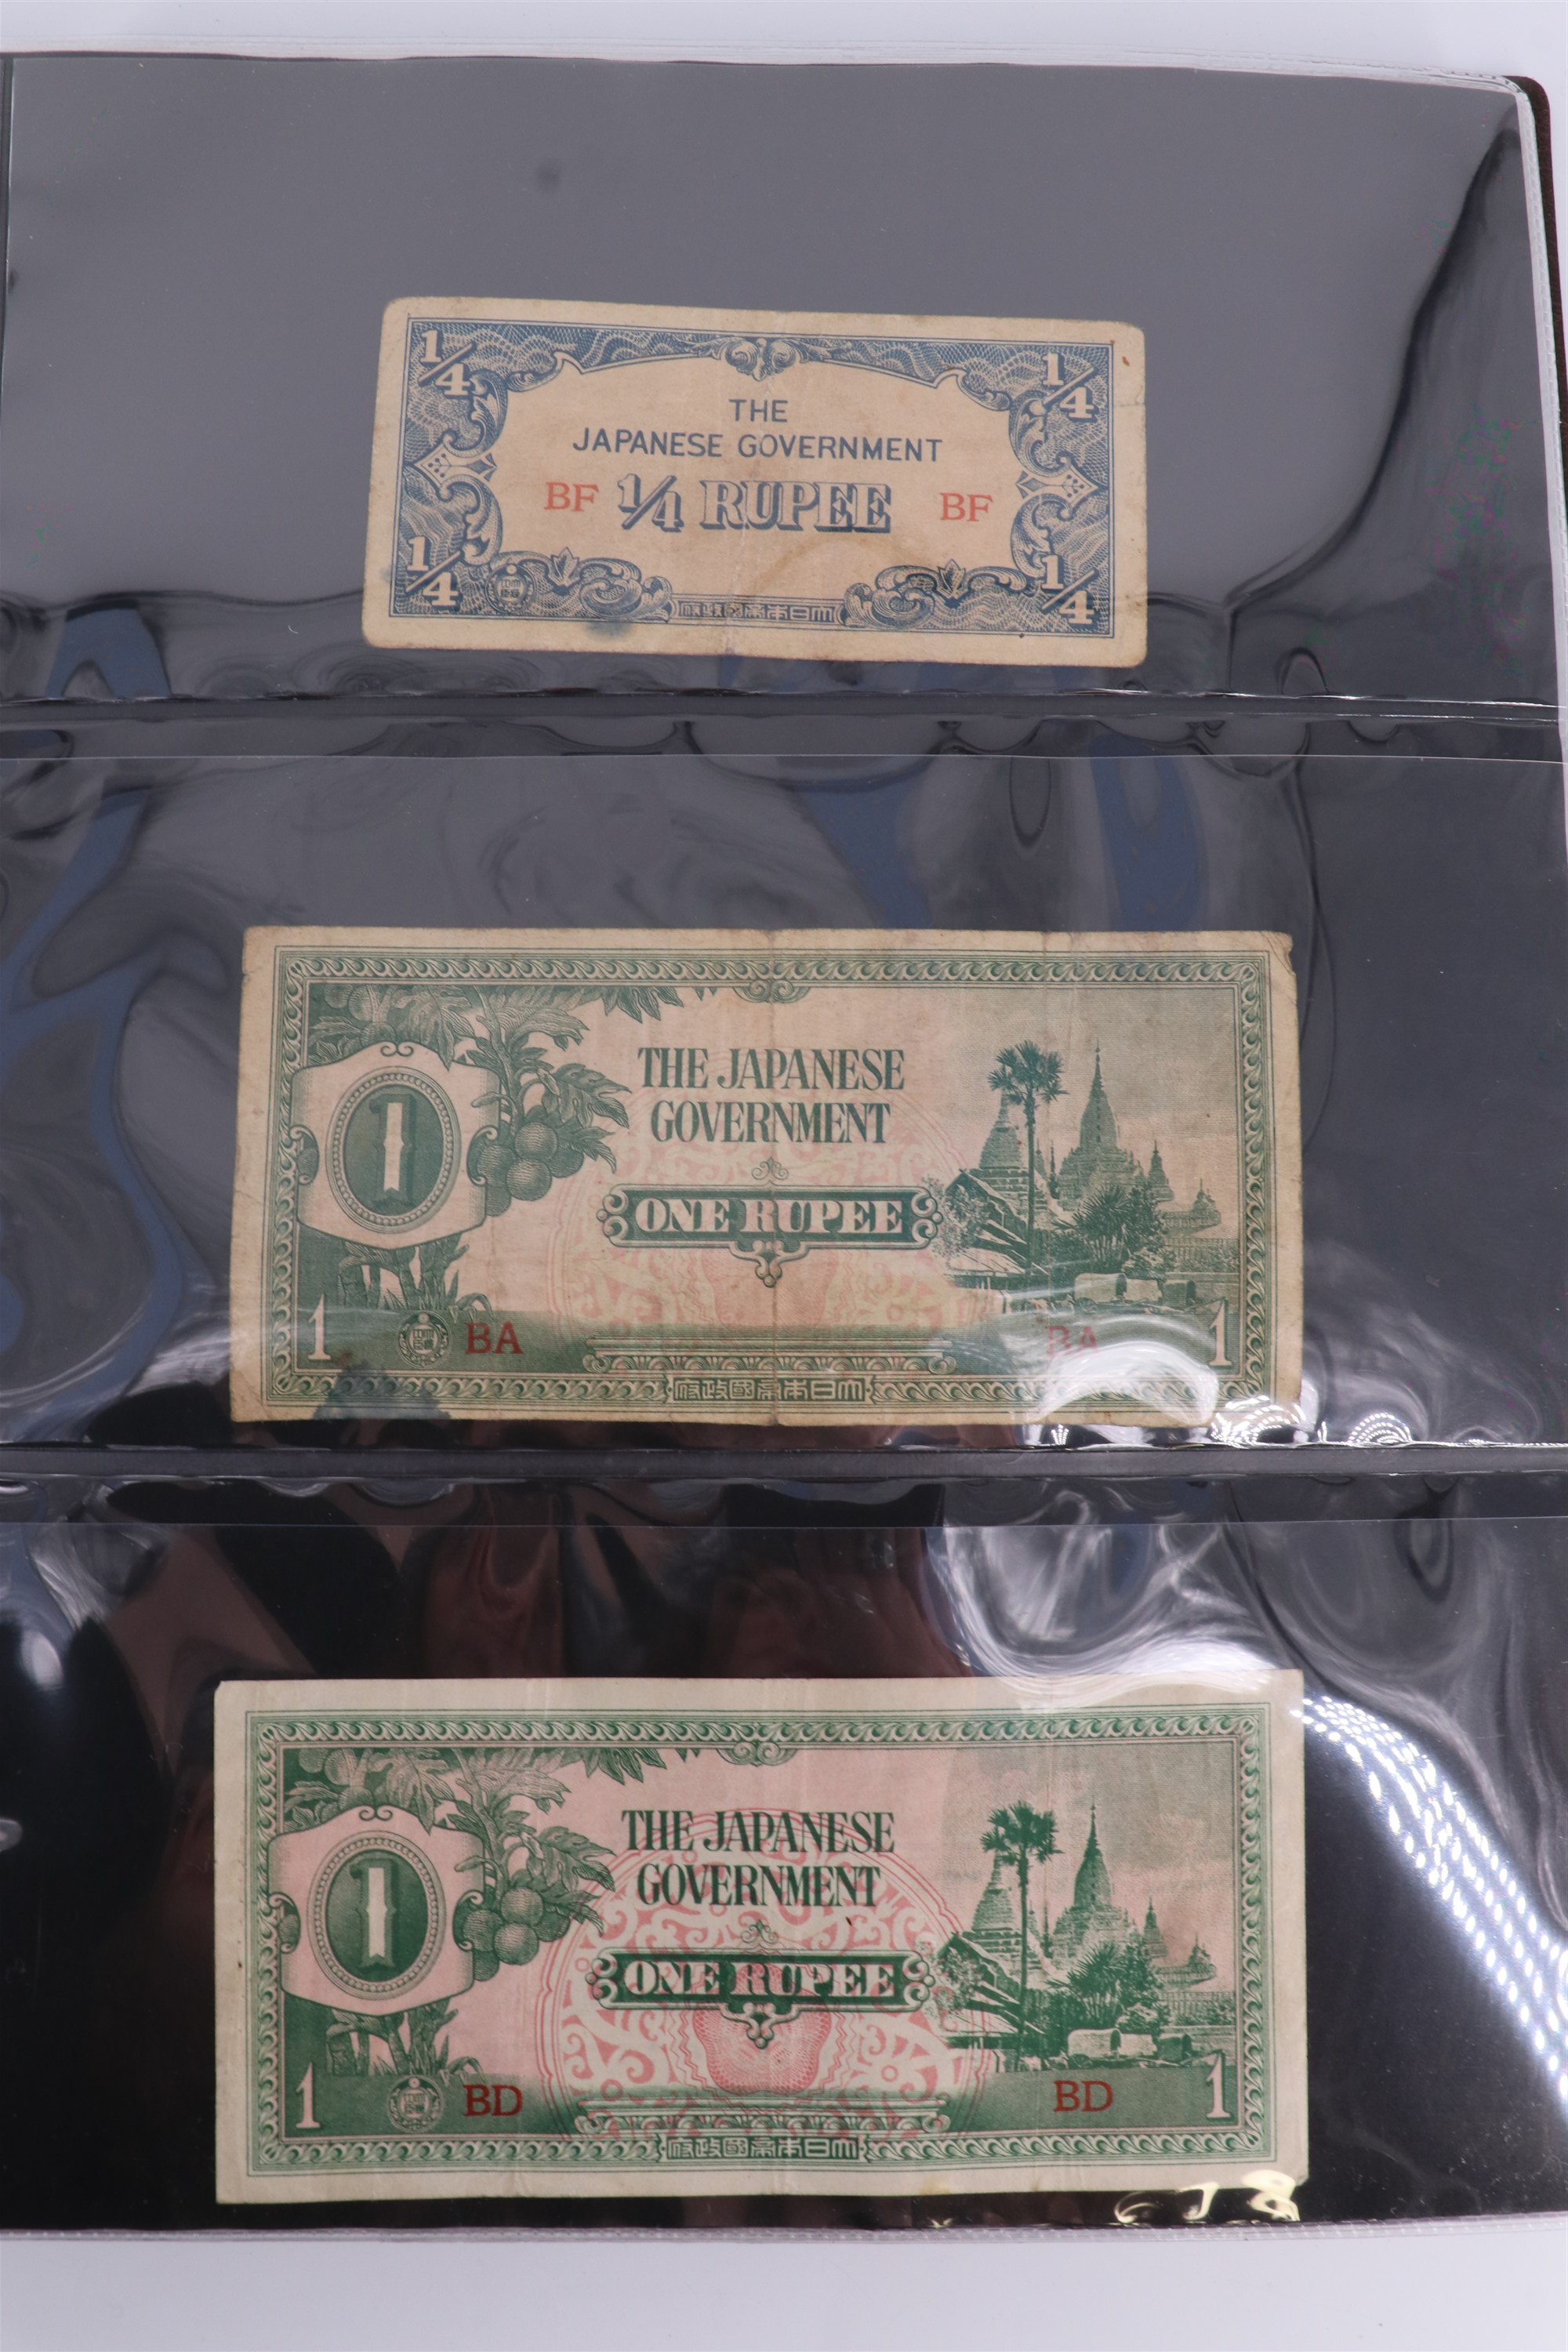 An album containing a collection of world banknotes, including Zaire (DR Congo), Ireland, - Image 34 of 87